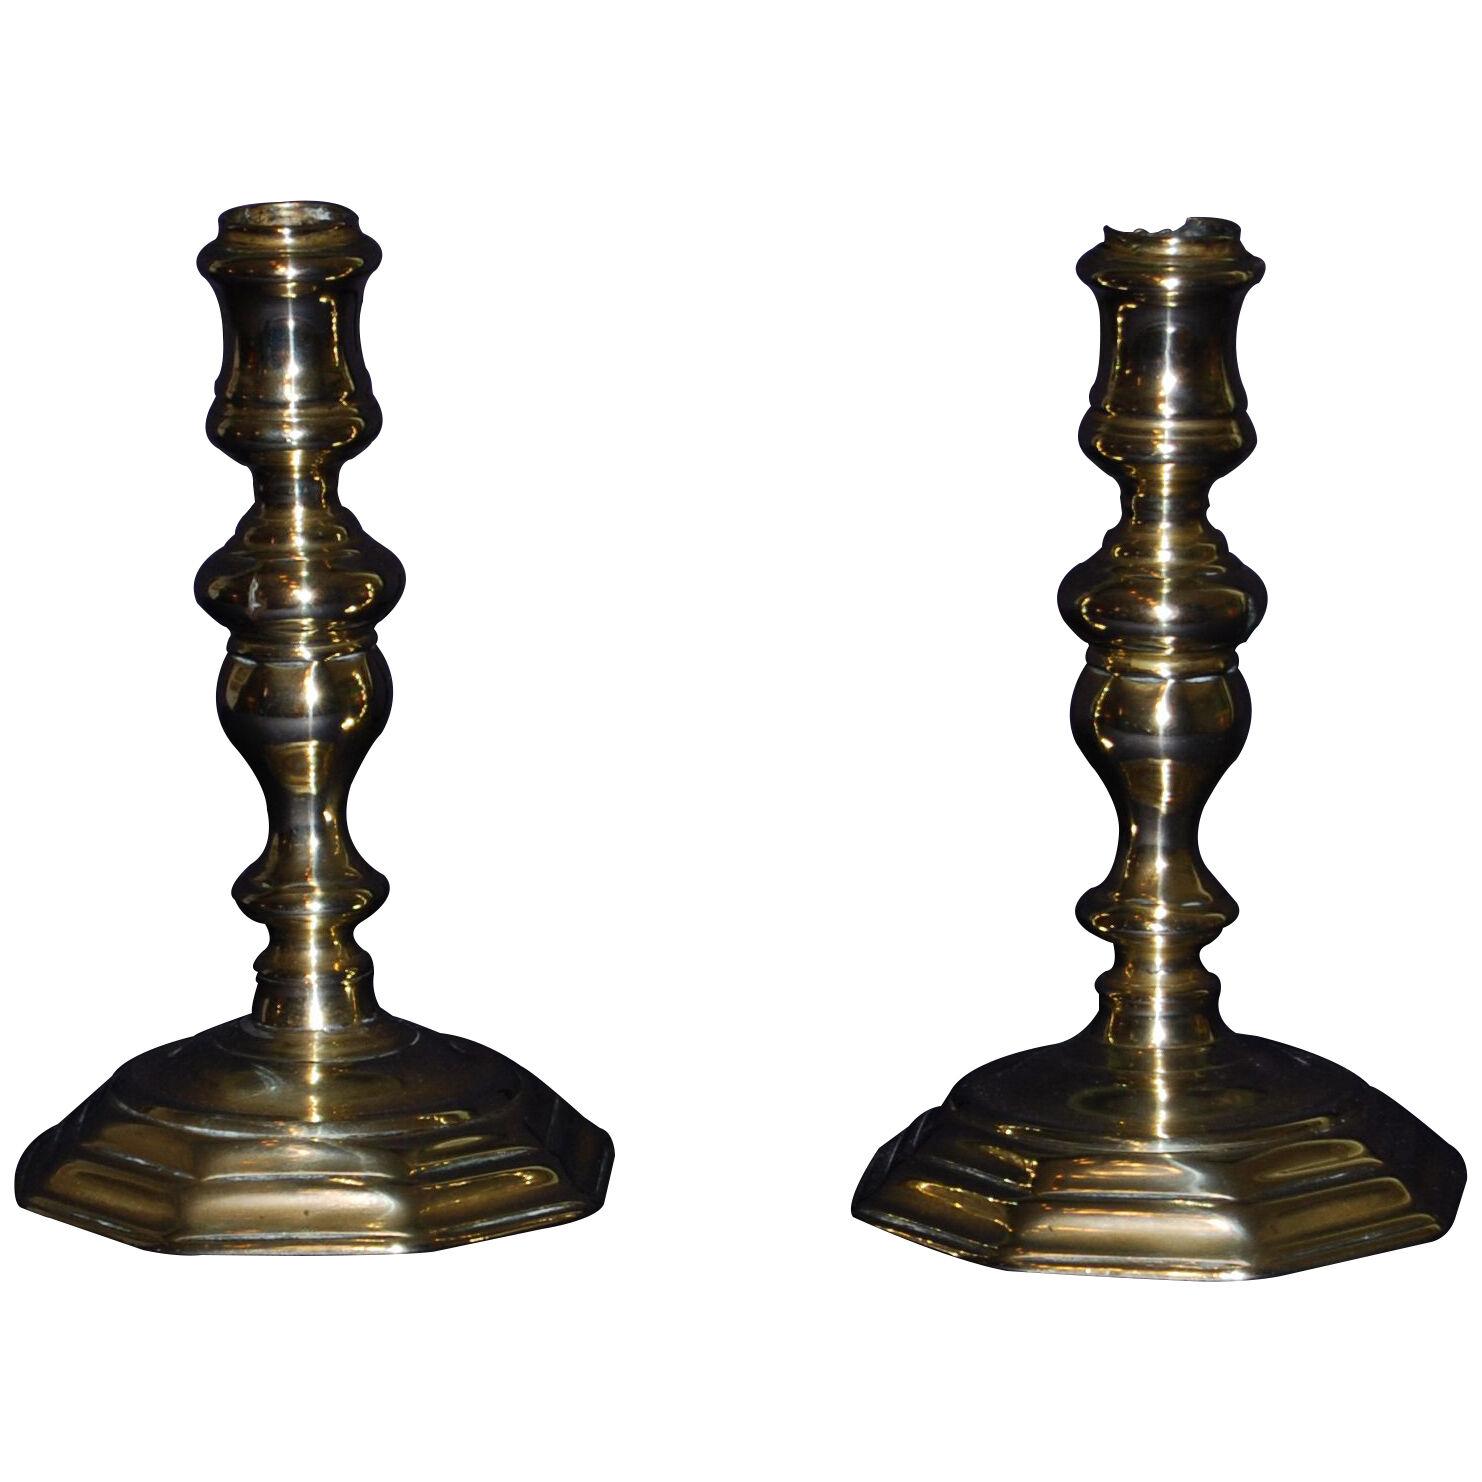 Pair of Early 18th. Century Brass Candlesticks